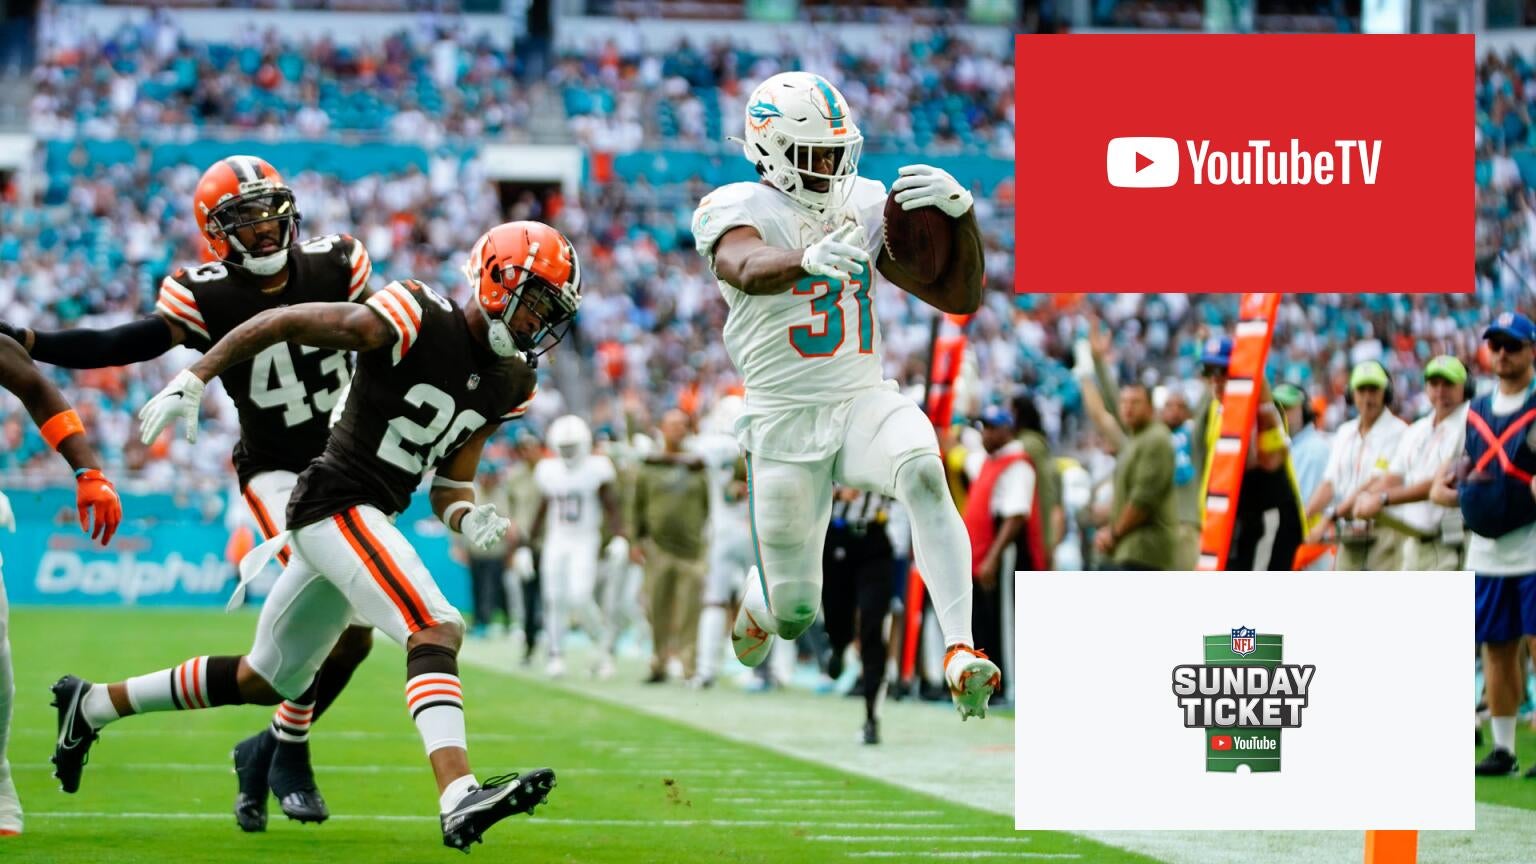 NFL Sunday Ticket needs more users for YouTube TV to feel good about its $2 billion deal to acquire the package.